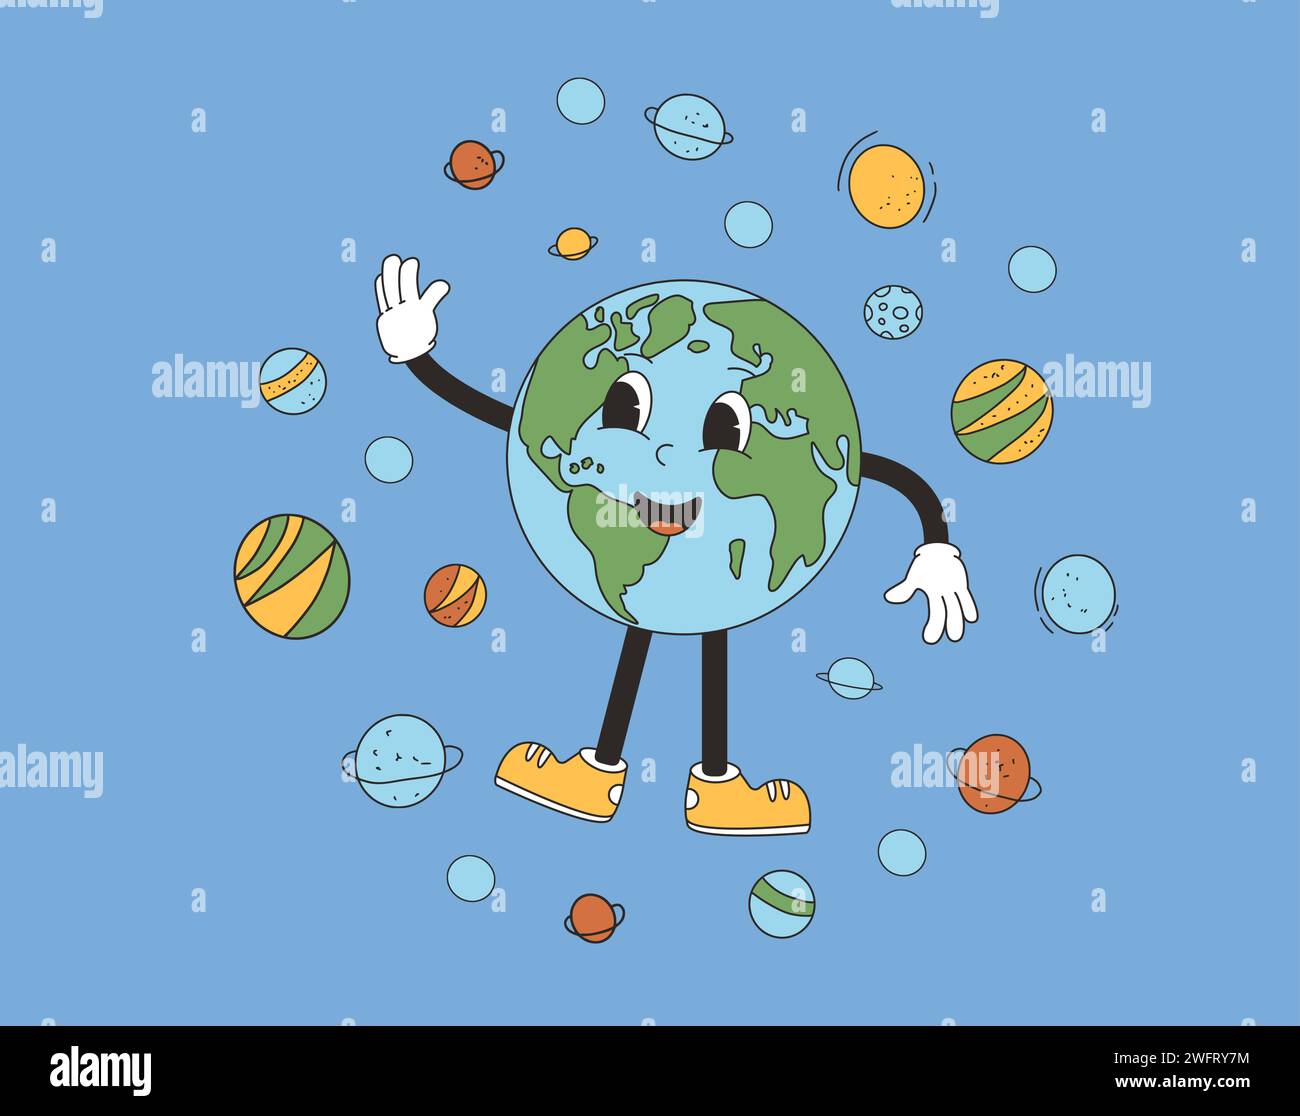 Earth cartoon character waving his hand in retro style. Smiling our planet character in universe cosmos. Vector illustration. Stock Vector